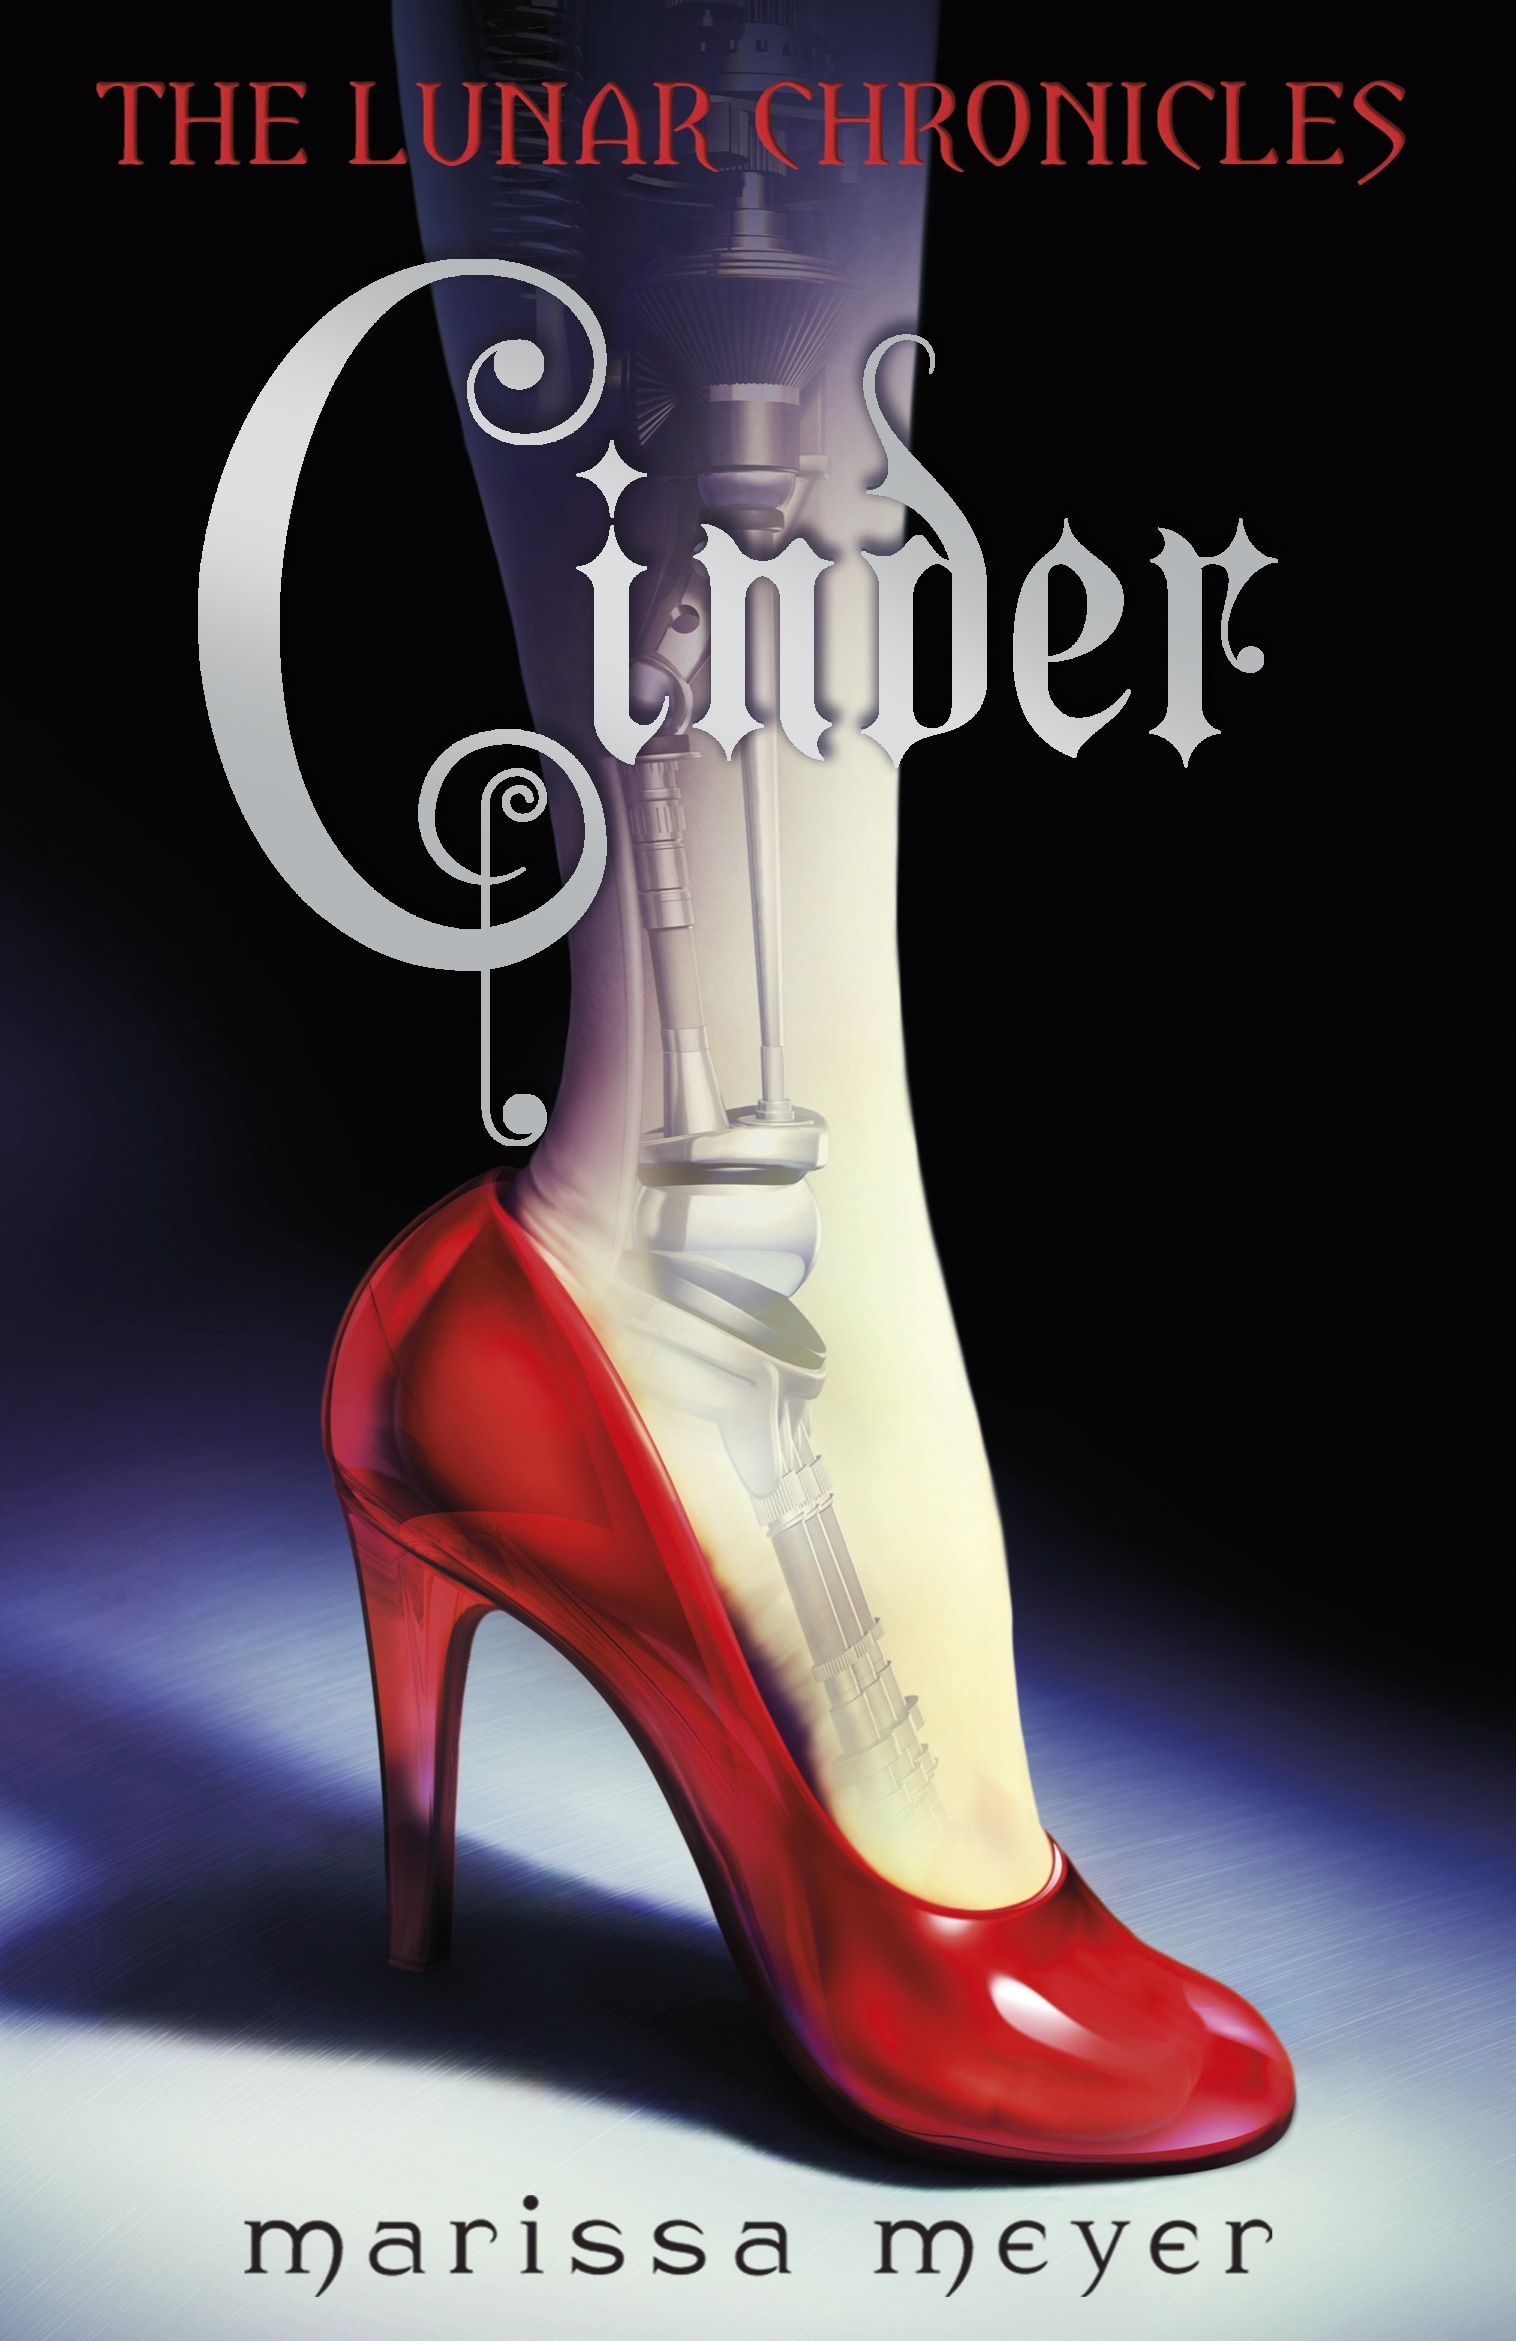 Book “Cinder (The Lunar Chronicles Book 1)” by Marissa Meyer — January 5, 2012